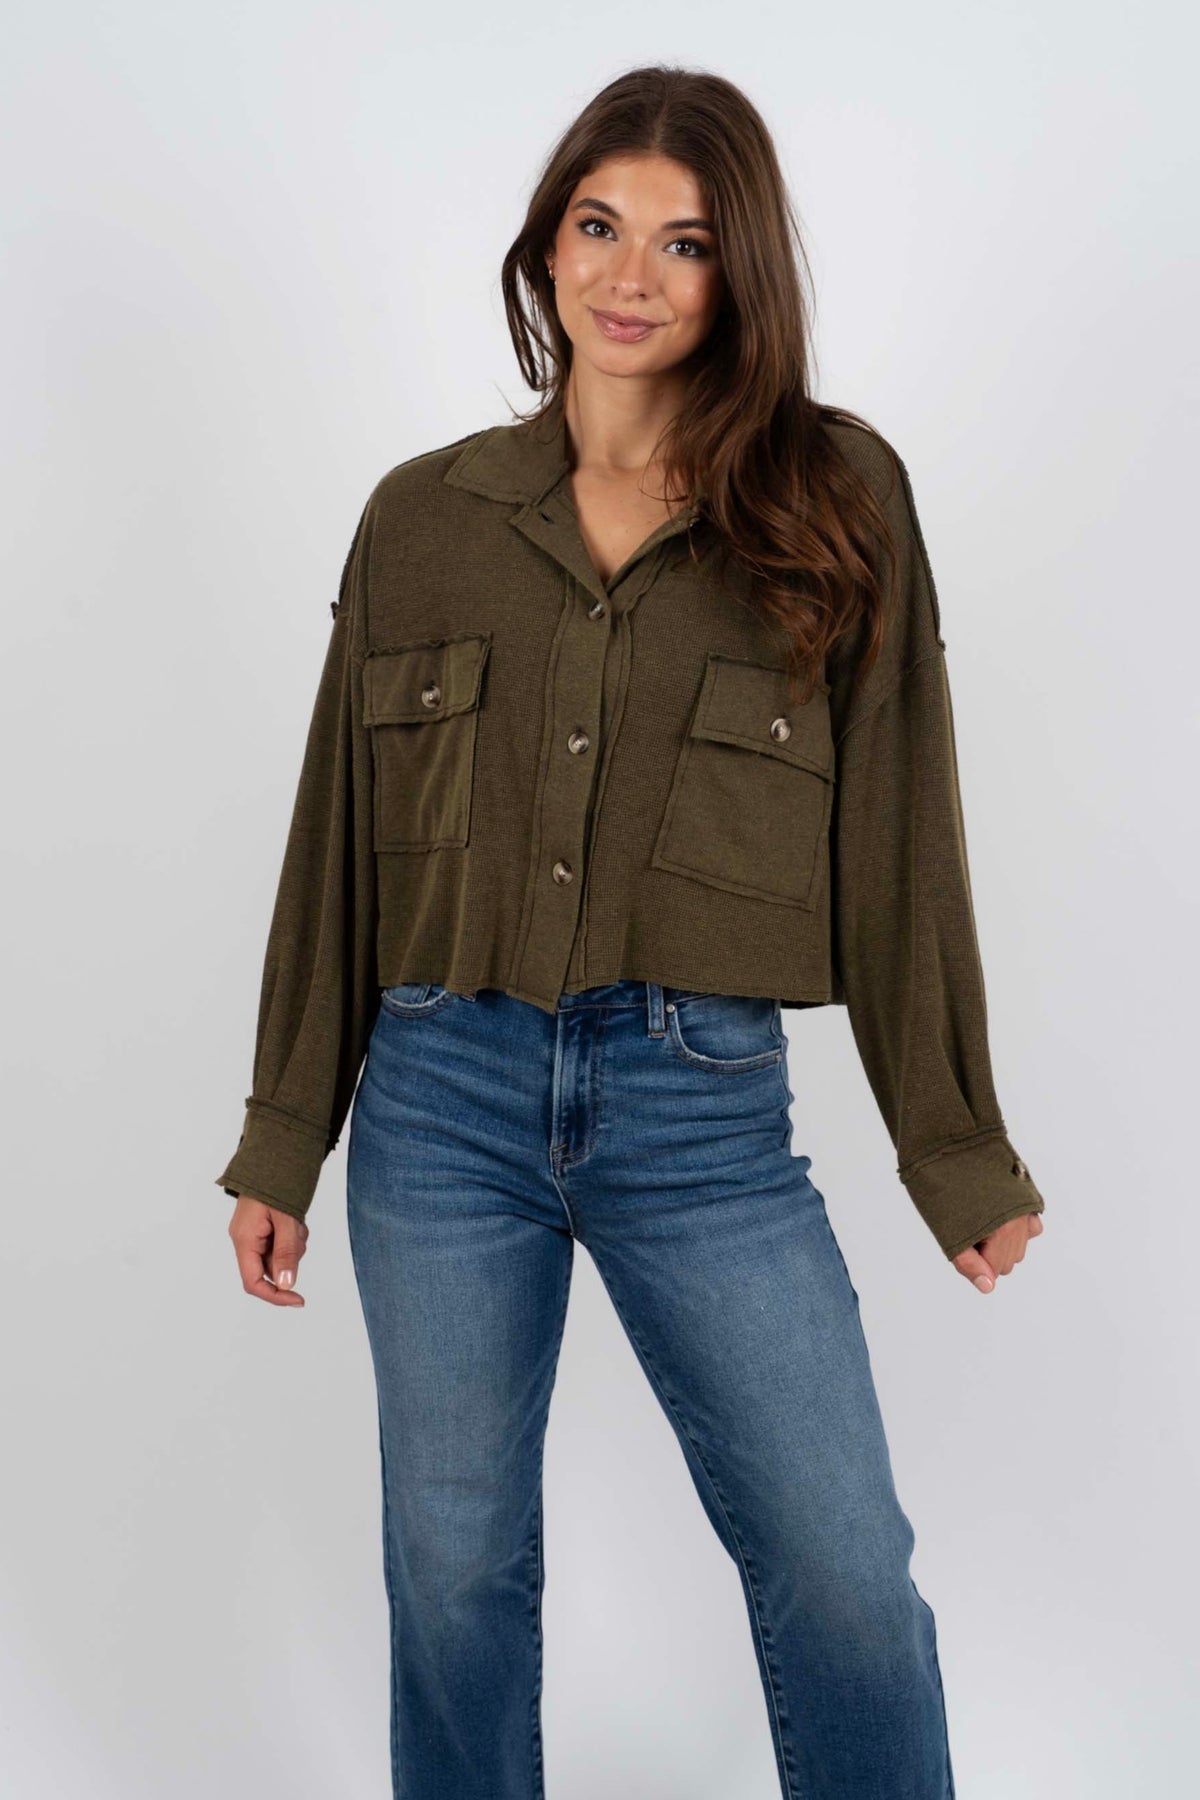 Seen It All Top (Olive)